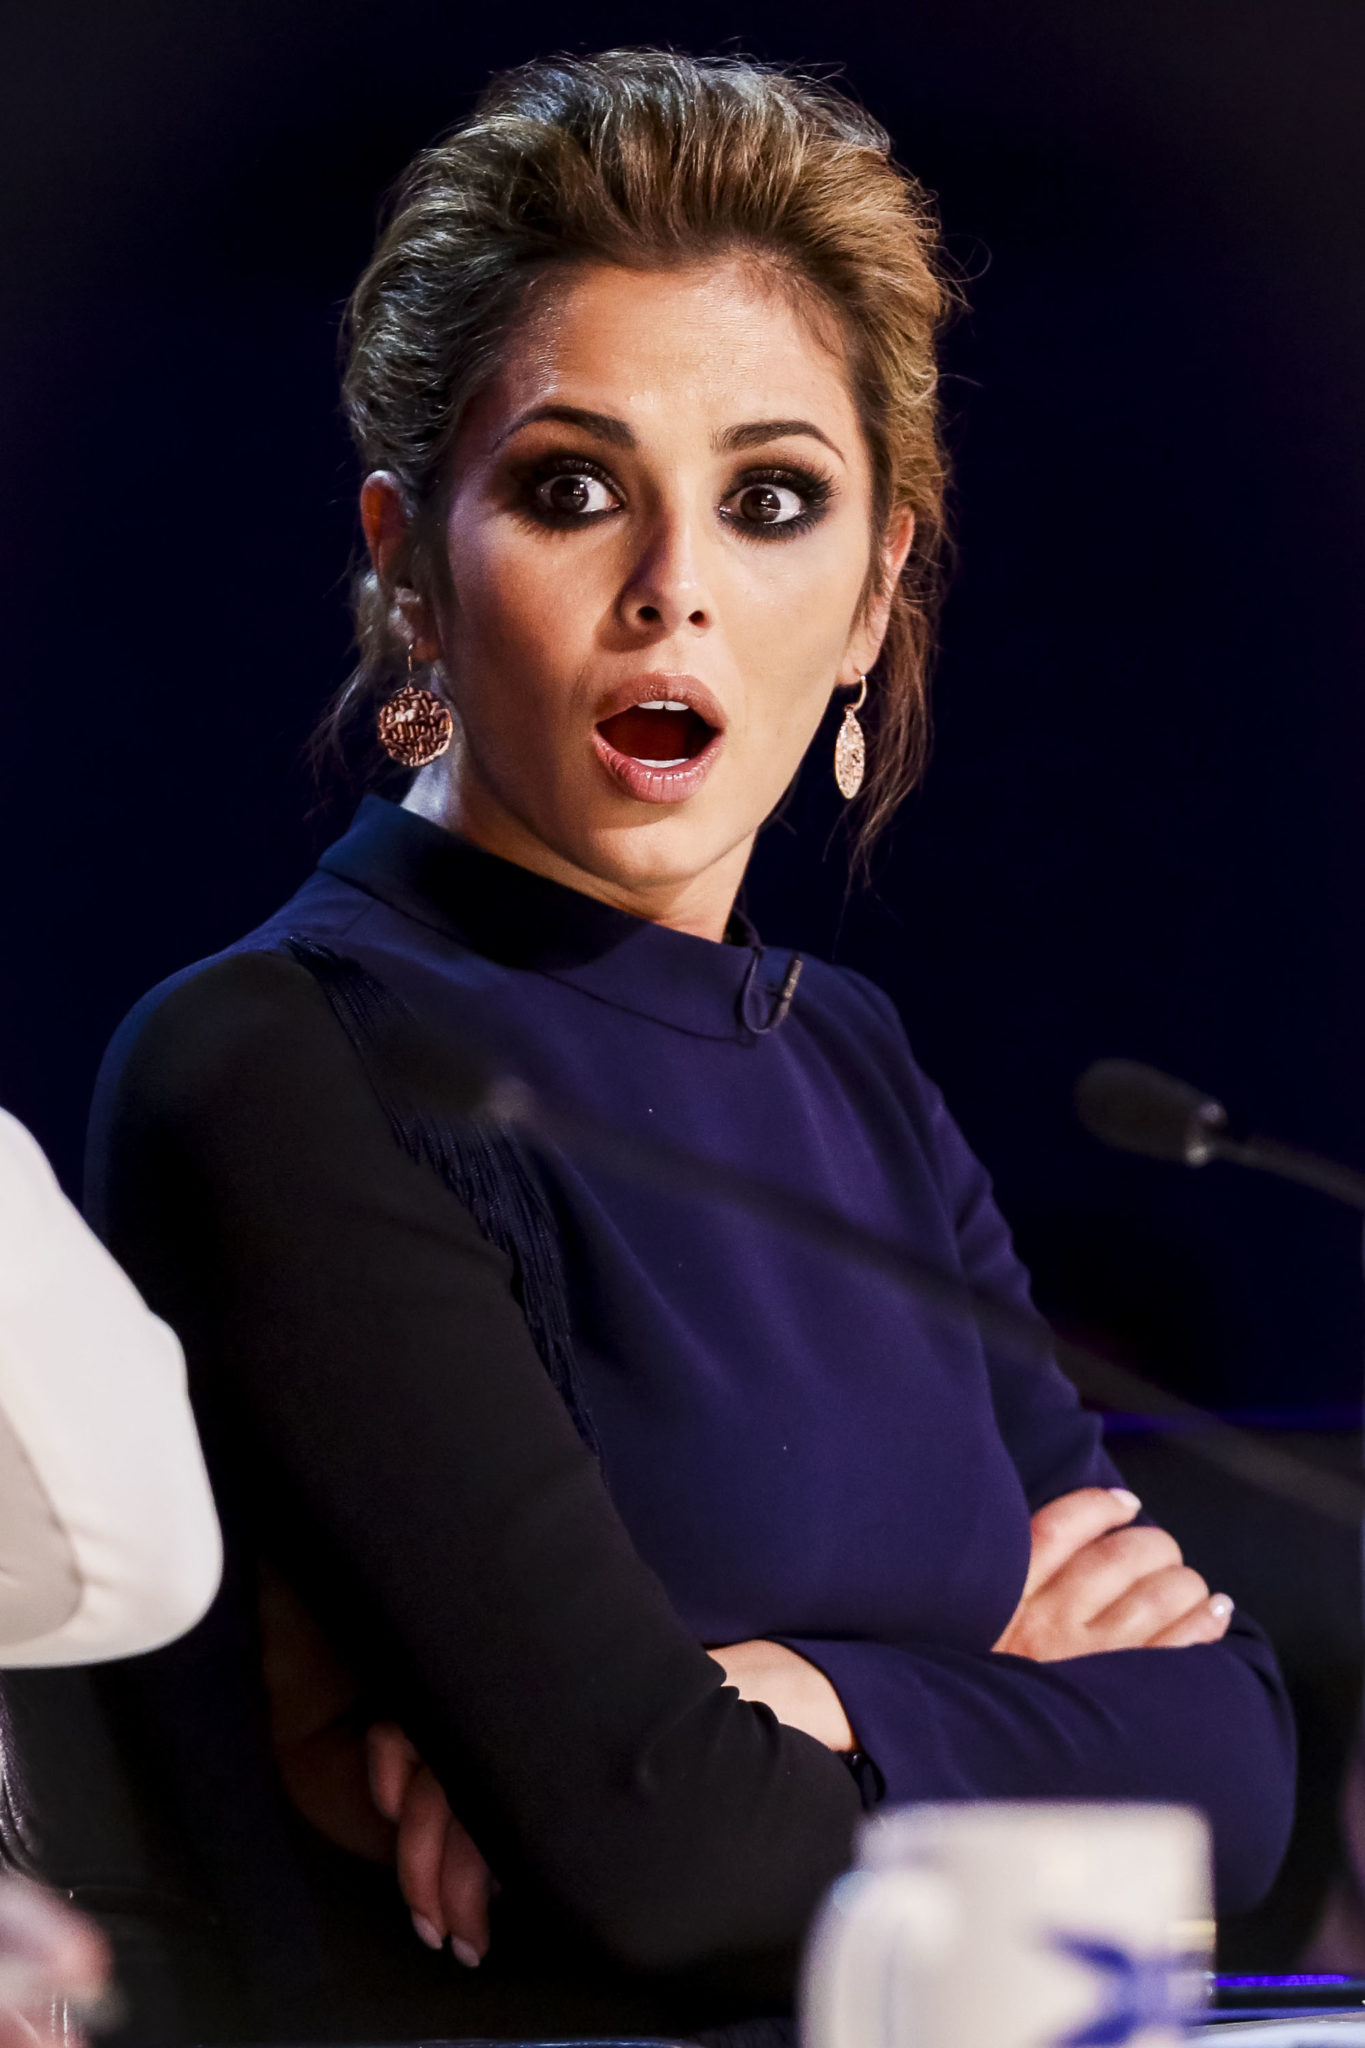 Majority Think Cheryl Should Be Dropped From X Factor